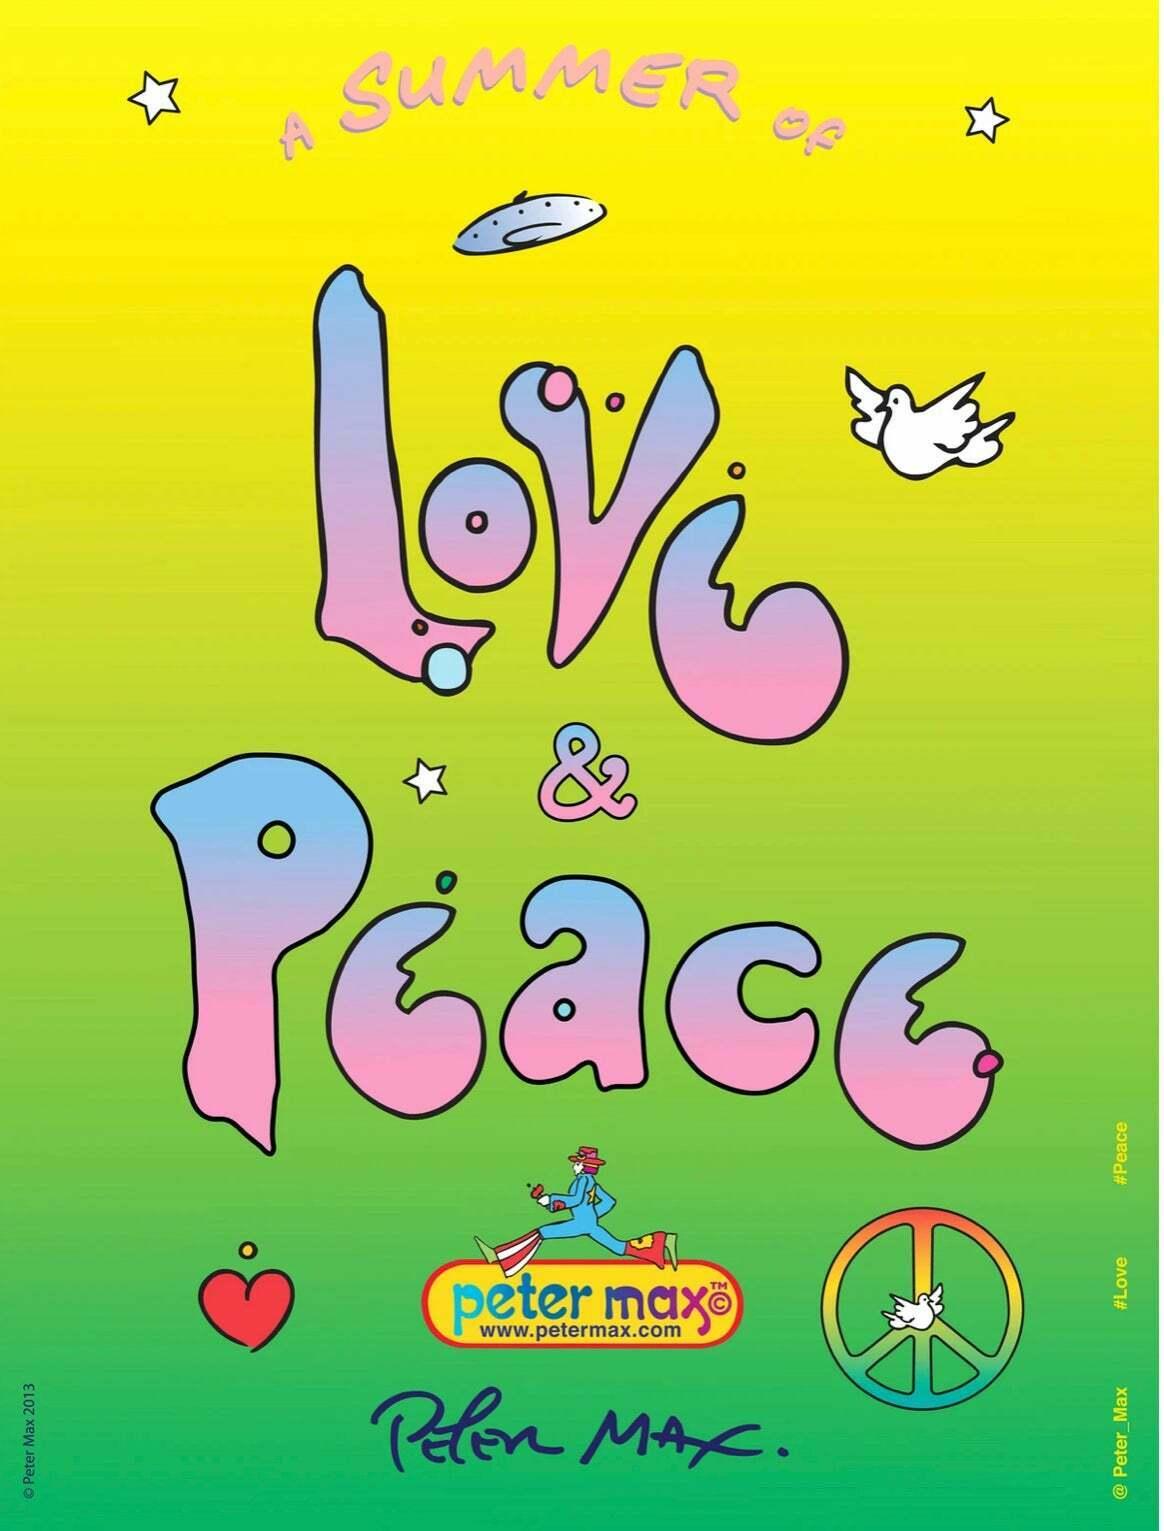 Peter Max Figurative Print - Summer of Love & Peace, 2013 Offset Lithograph -SIGNED